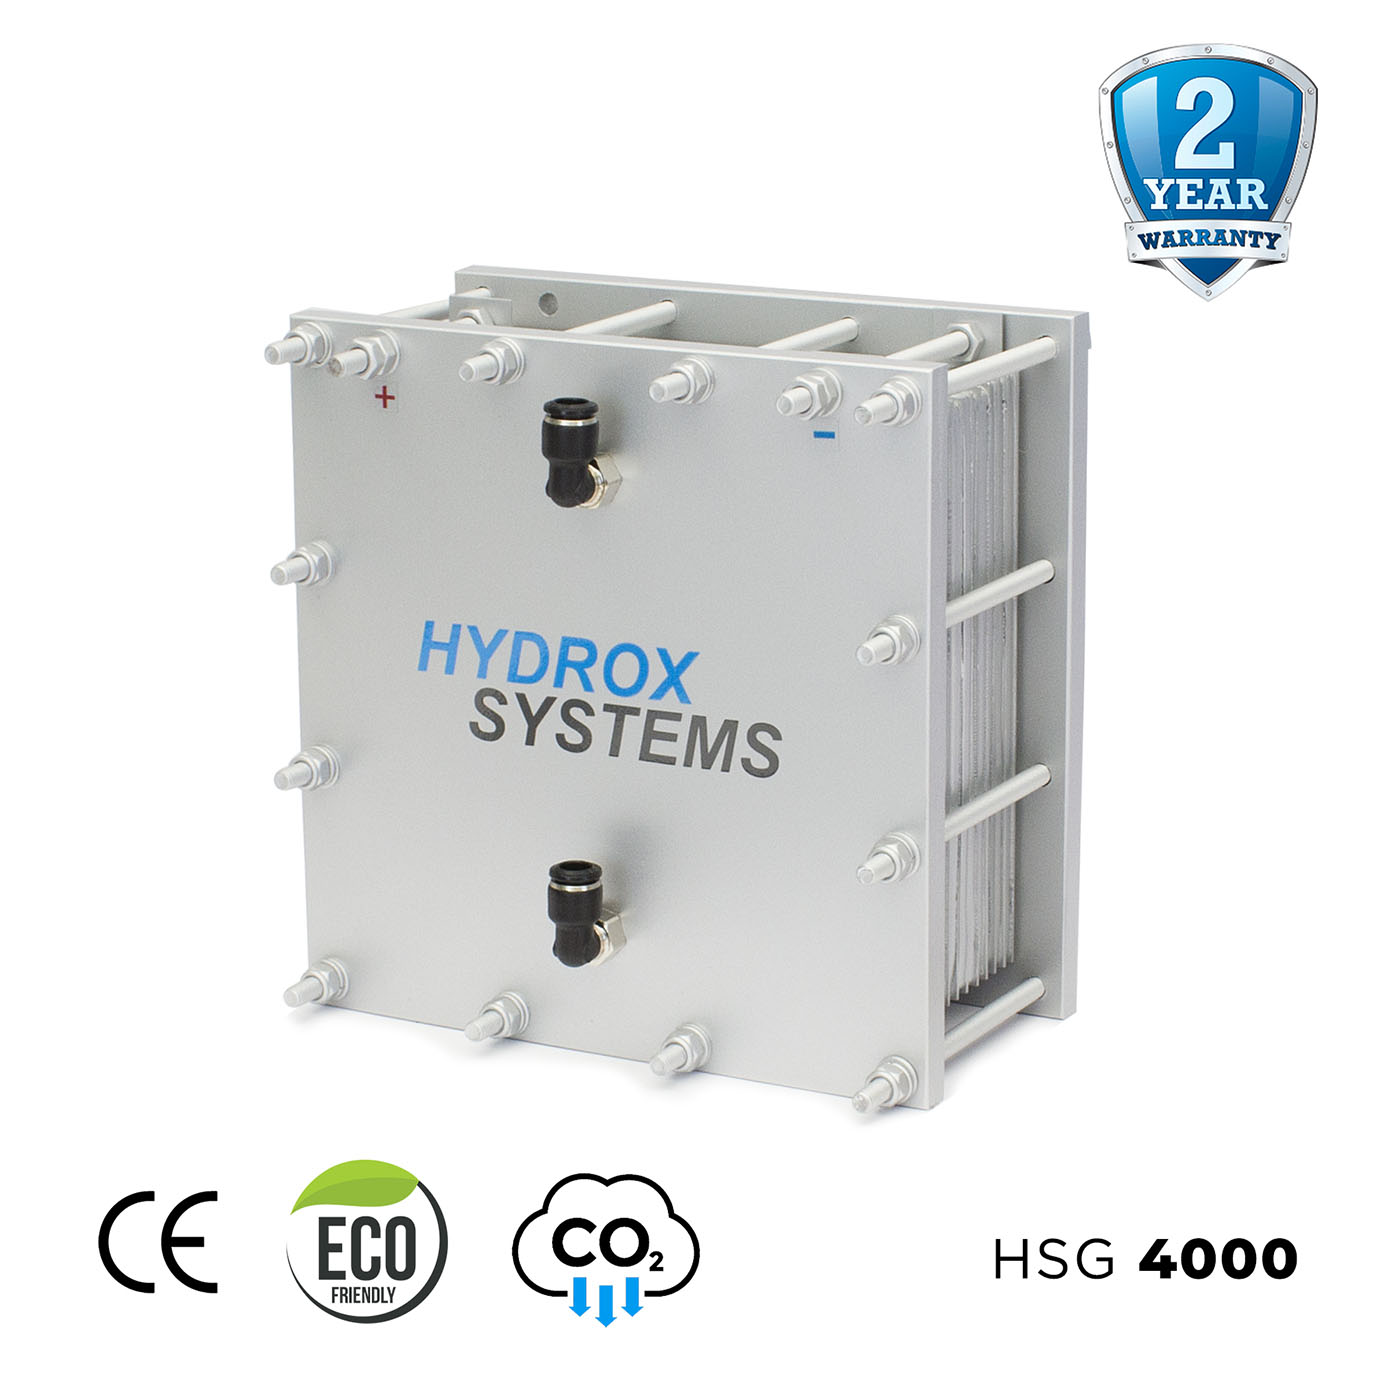 reduce emissions with hho generator